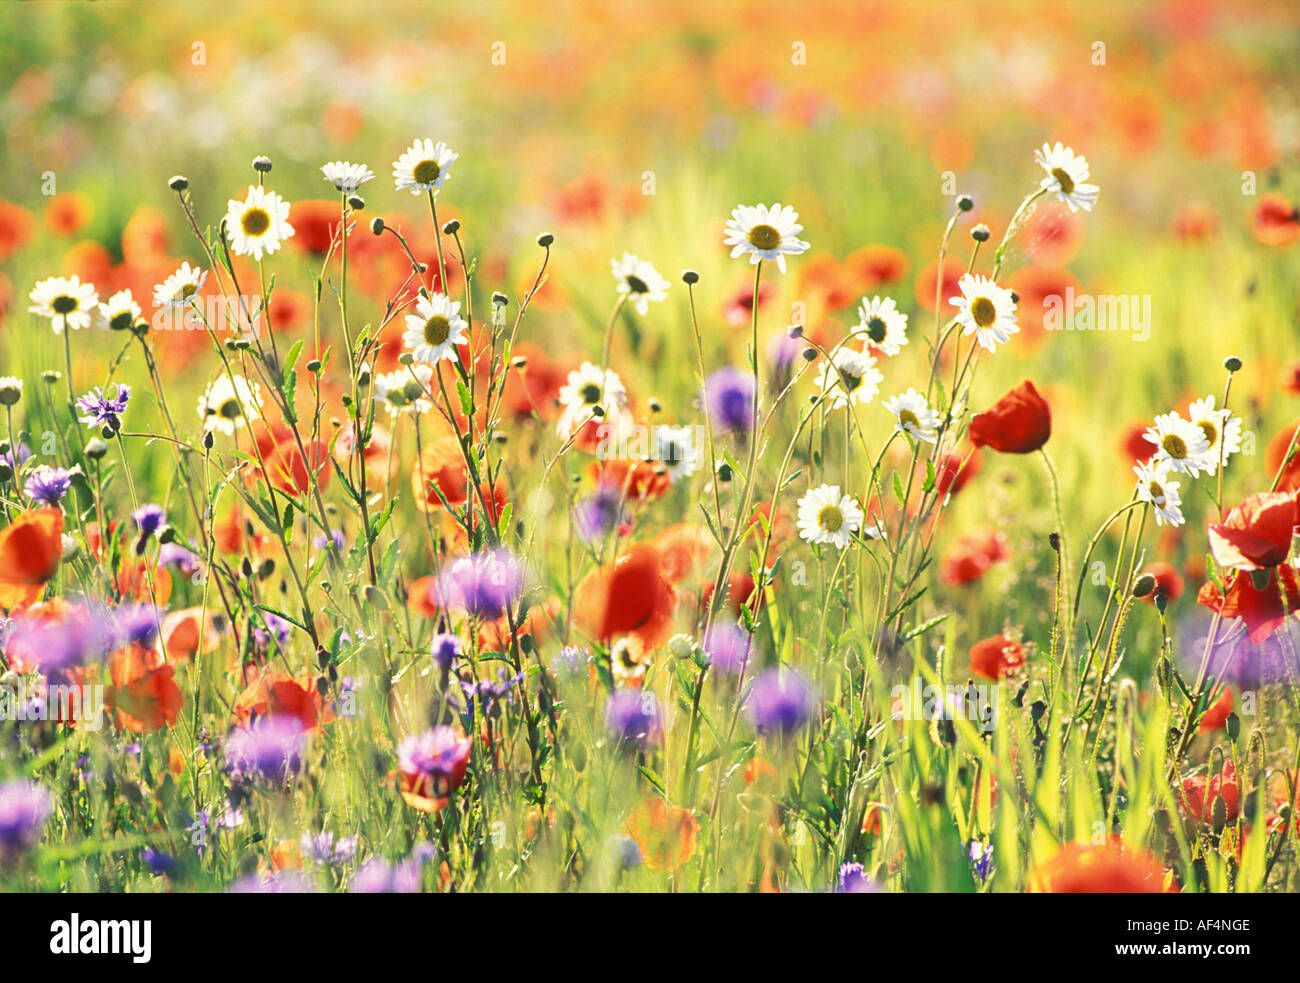 Field of poppies oxeye daisys and blue cornflowers Stock Photo